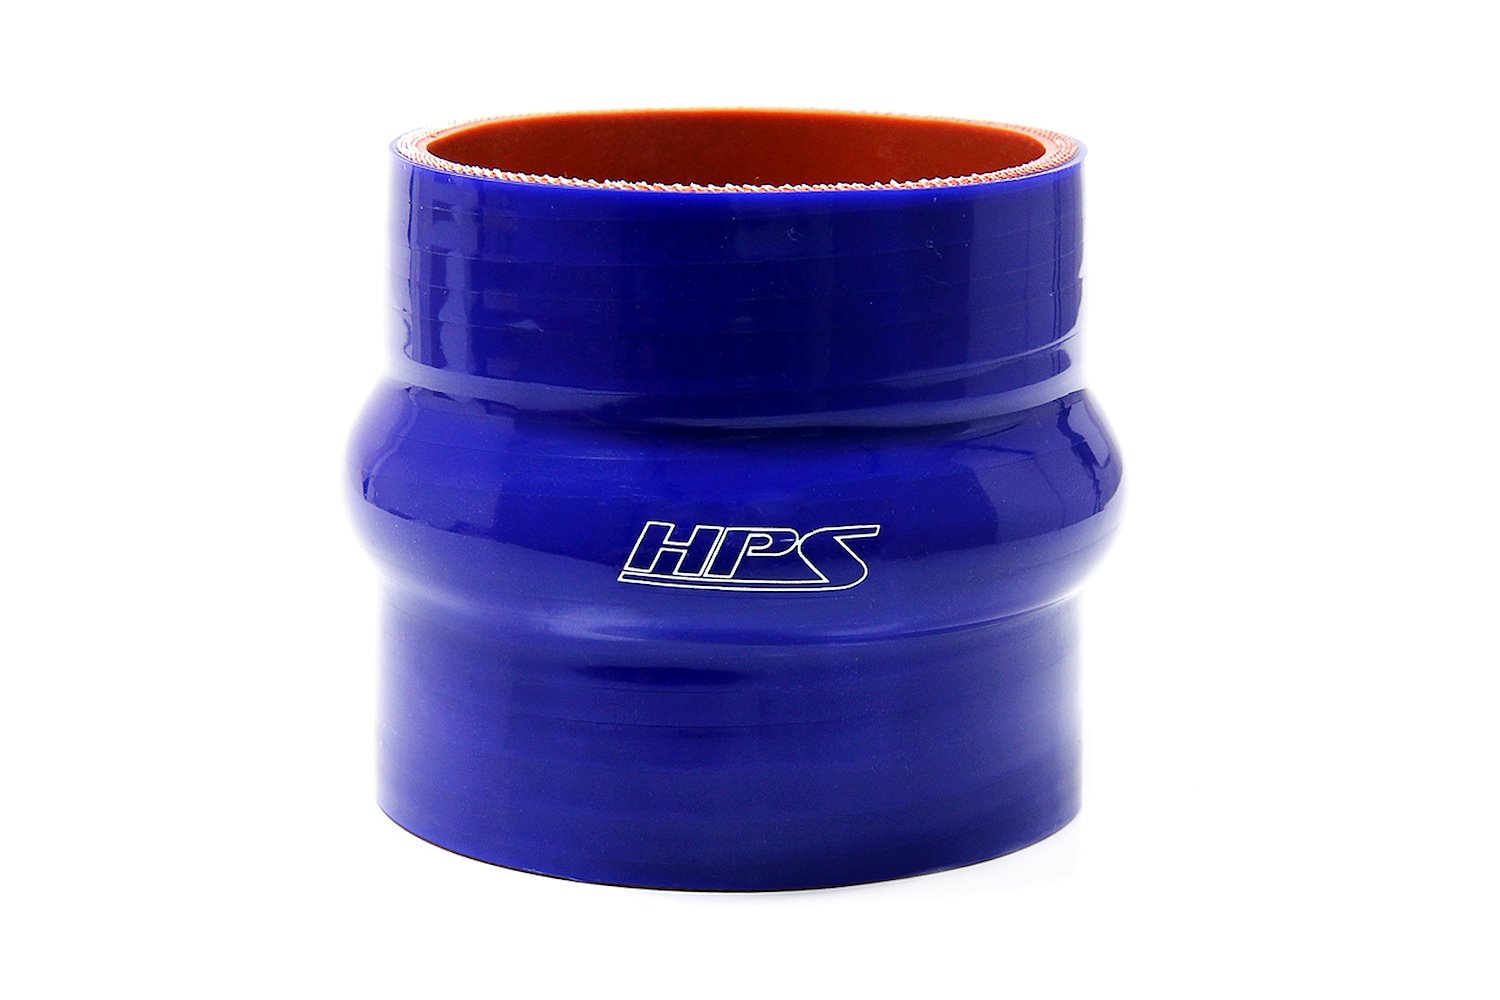 HTSHC-350-L4-BLUE Silicone Hump Coupler Hose, High-Temp 4-Ply Reinforced, 3-1/2 in. ID, 4 in. Long, Blue